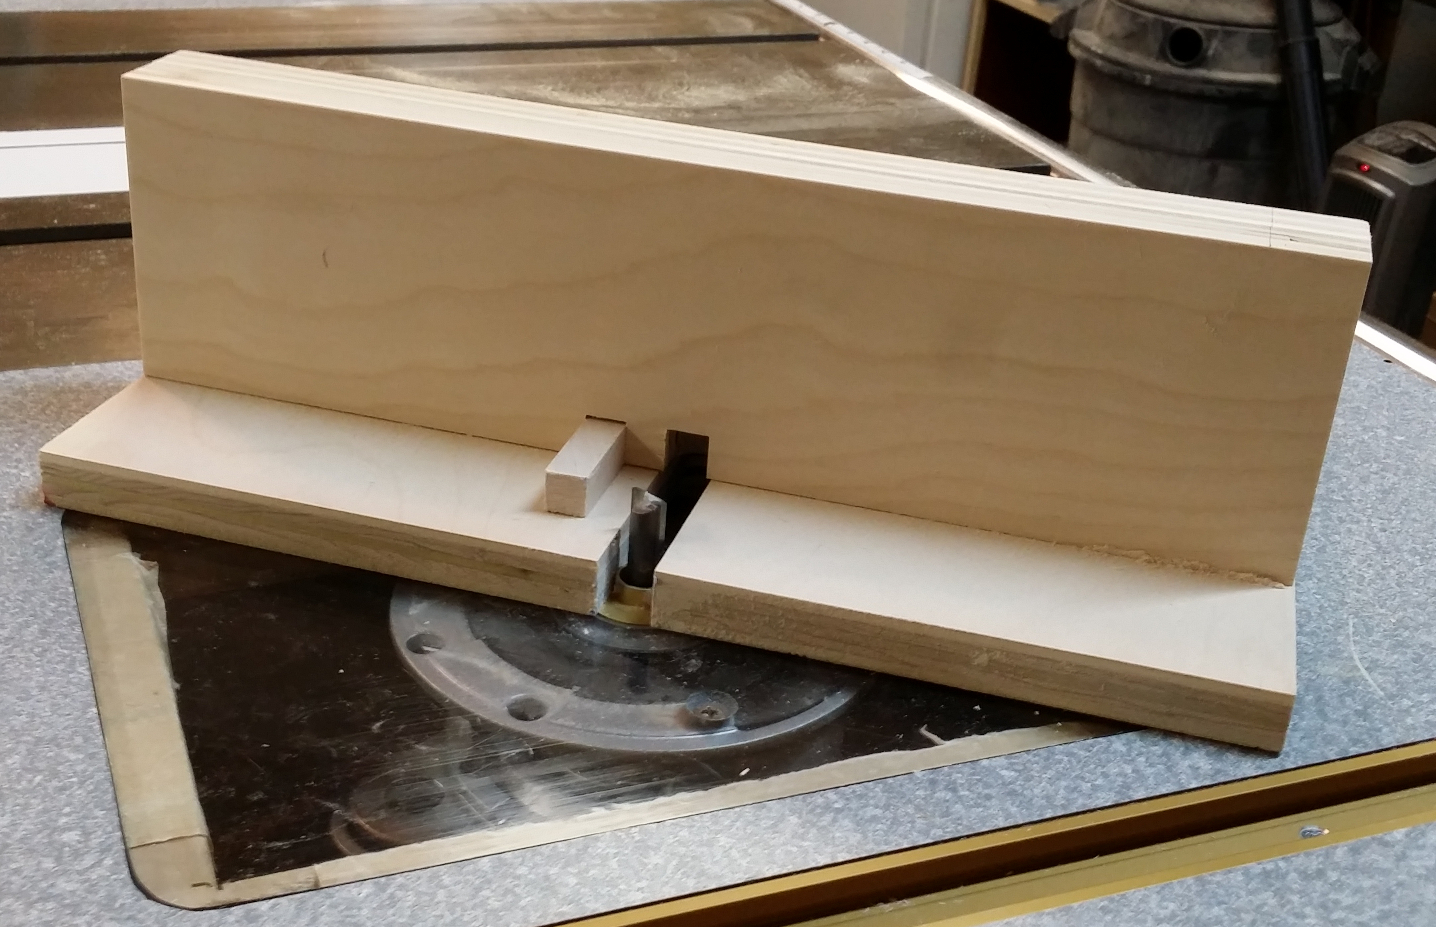 Shop-made Box Joint Jig  Diary of a Wood Nerd